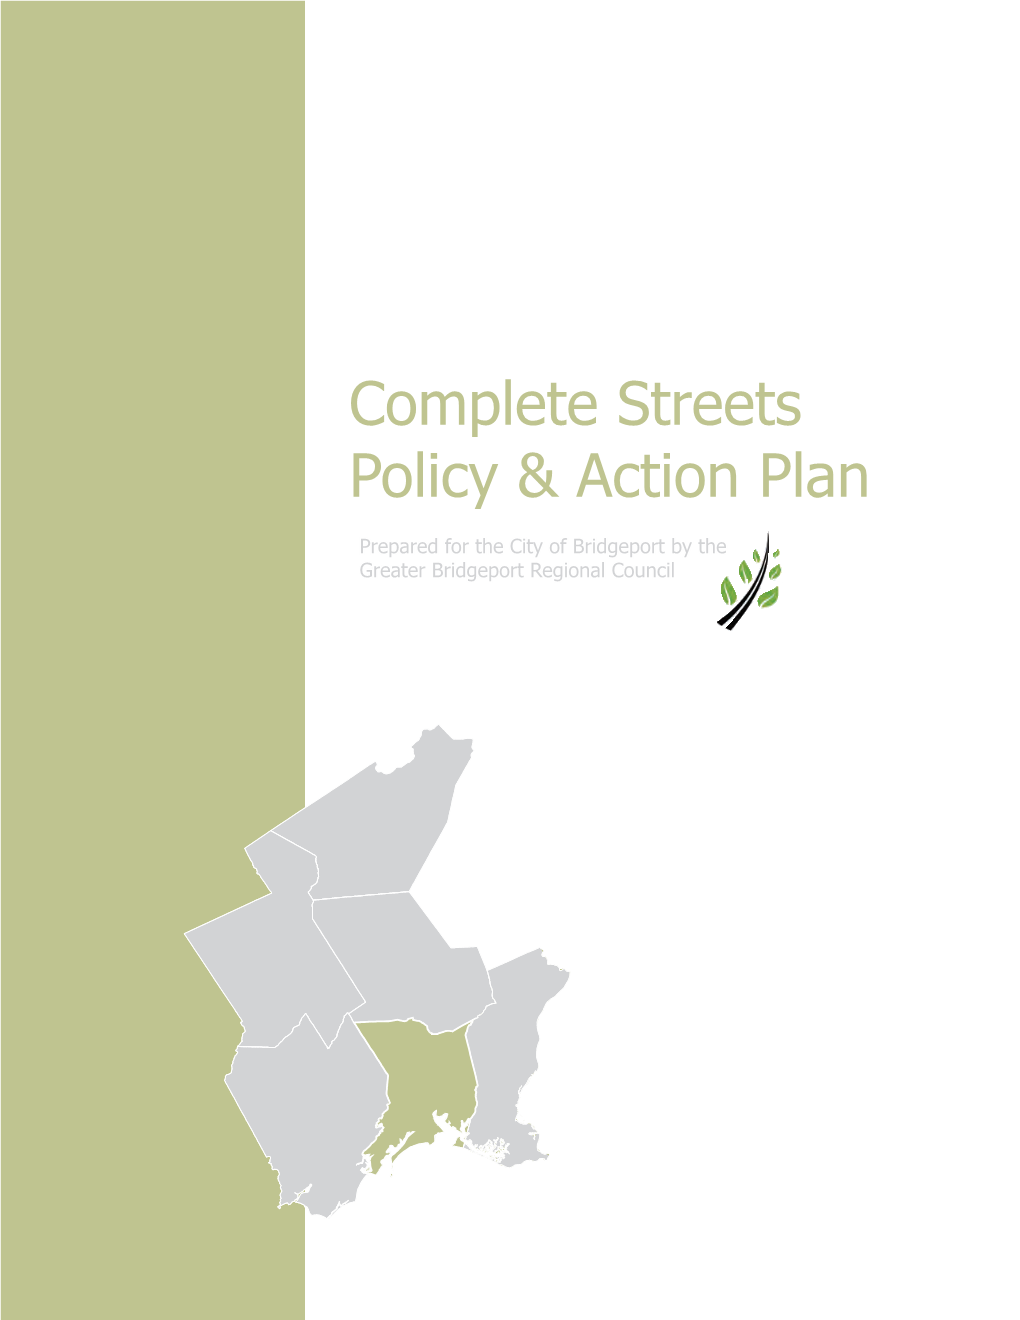 Complete Streets Policy & Action Plan